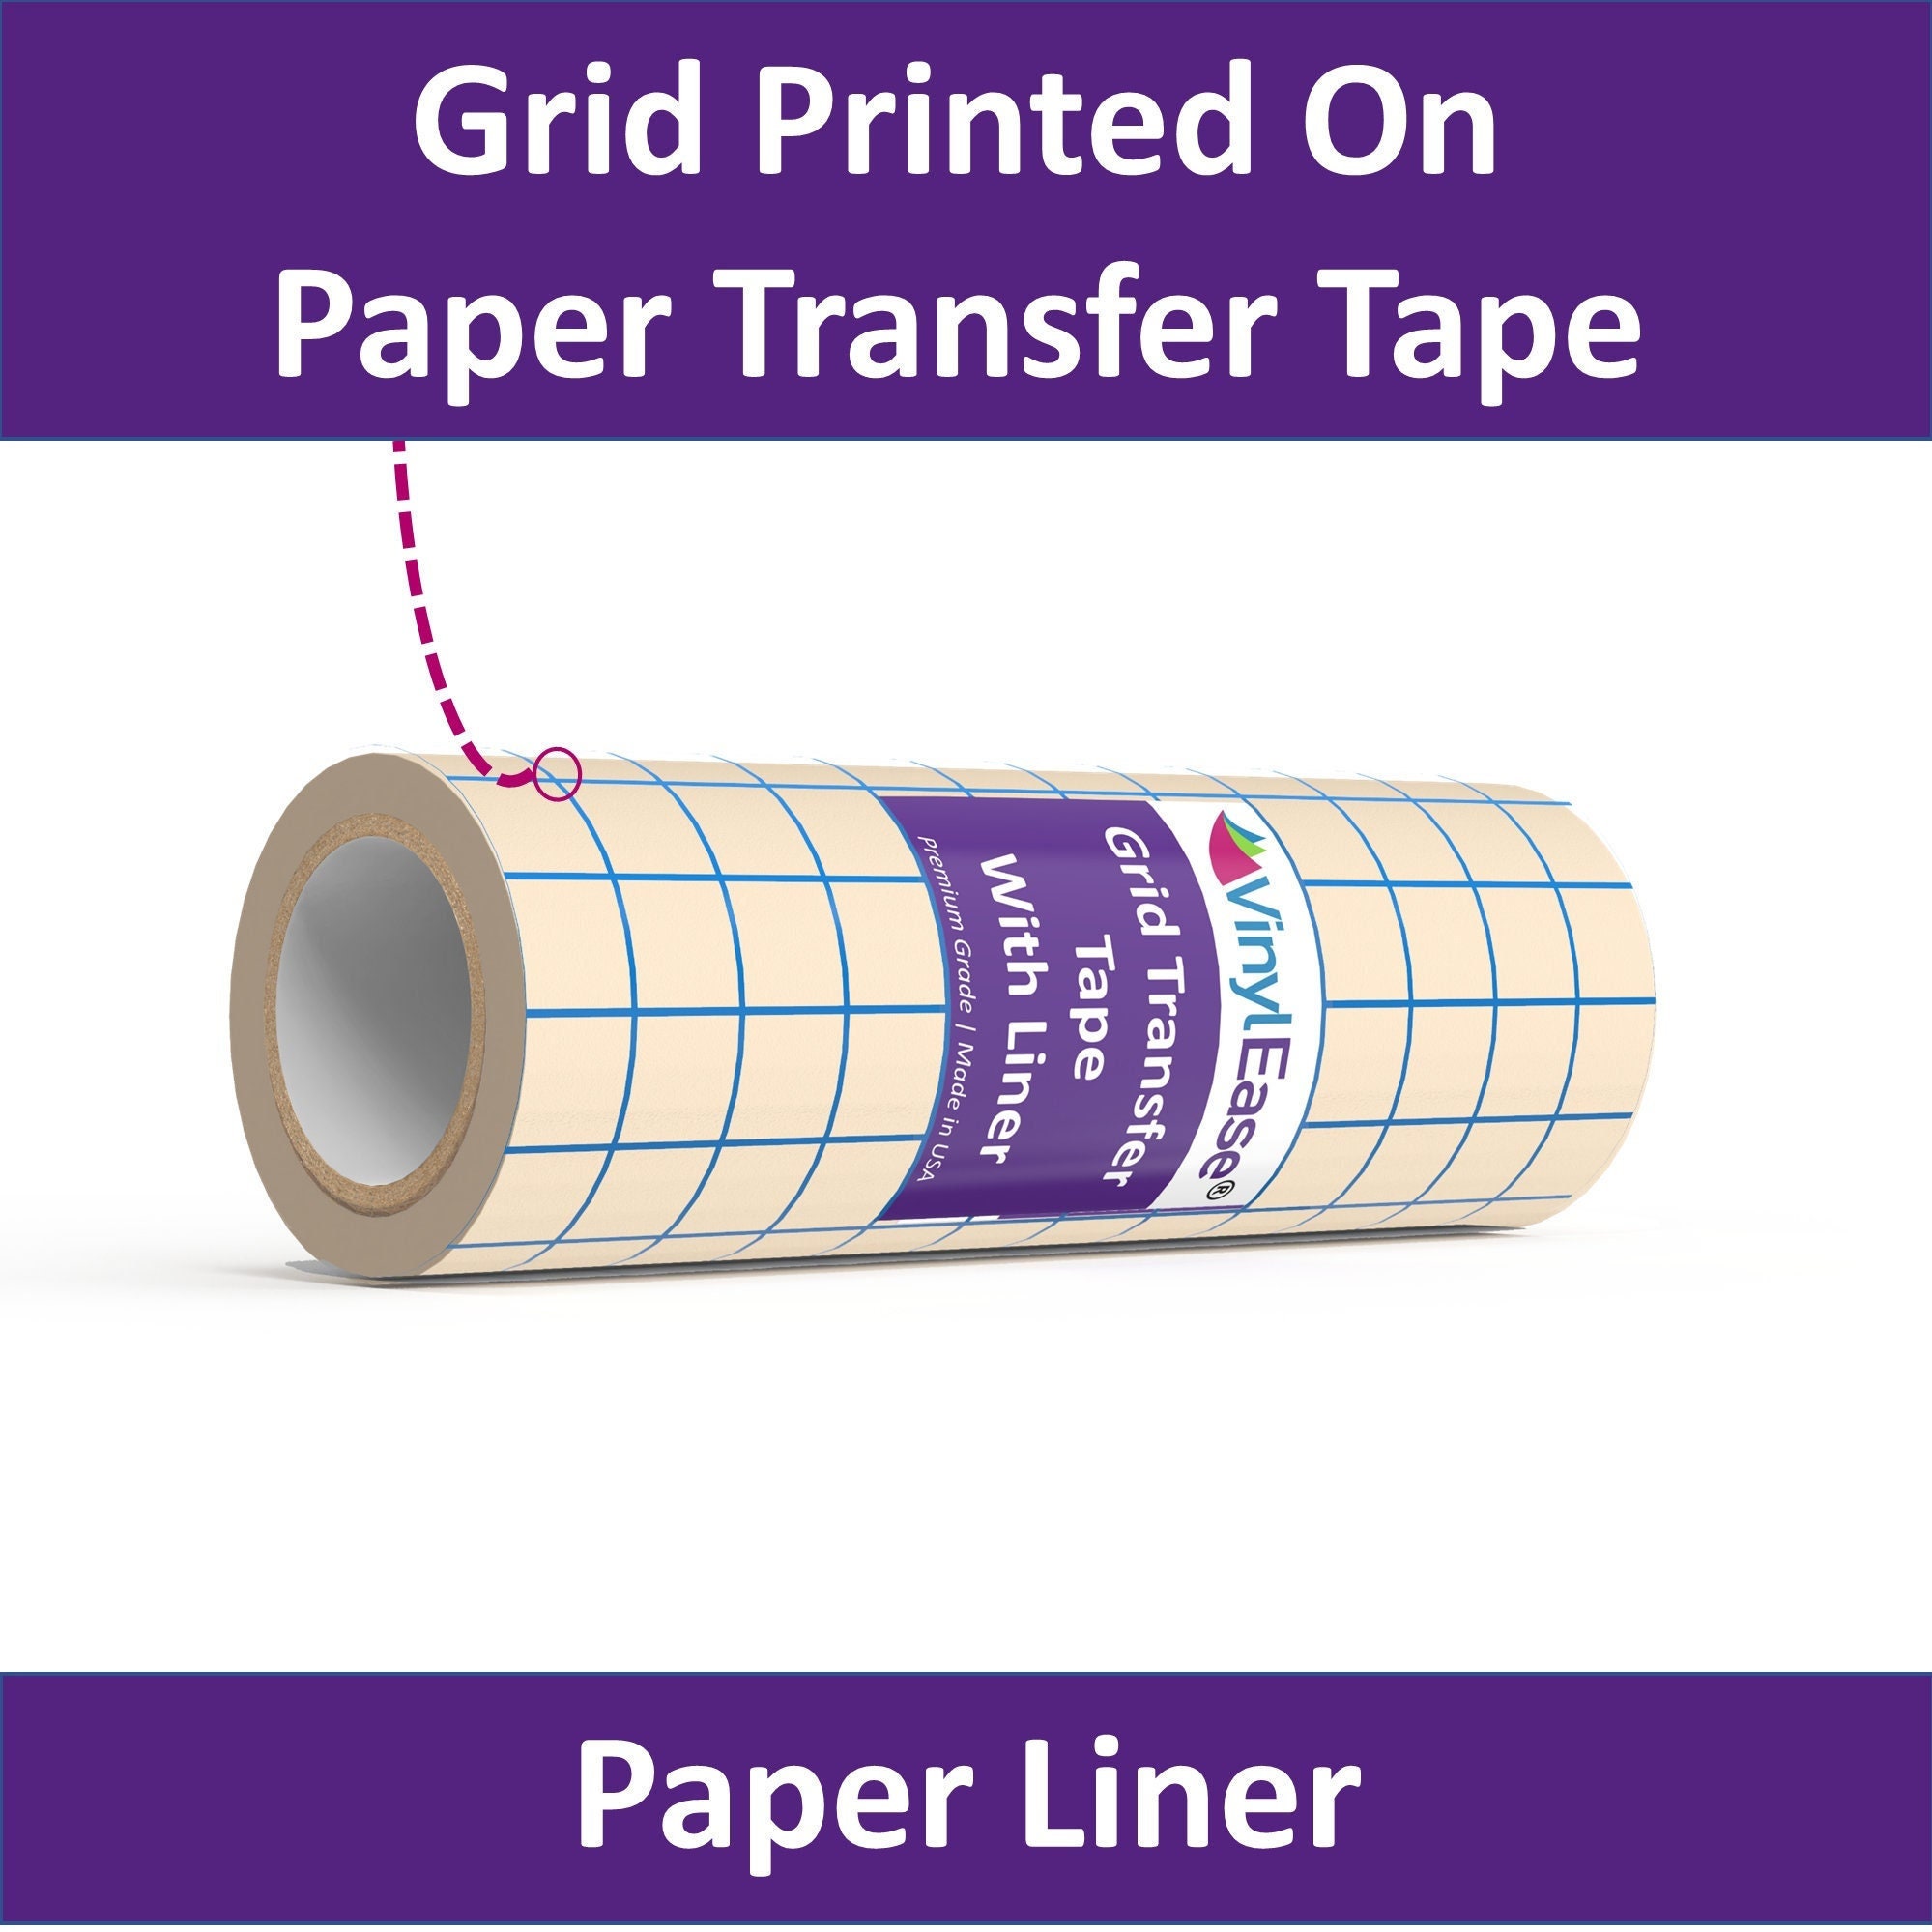 Gridlined Paper Transfer Tape - 12x30' Roll (Blue 1 Grid)